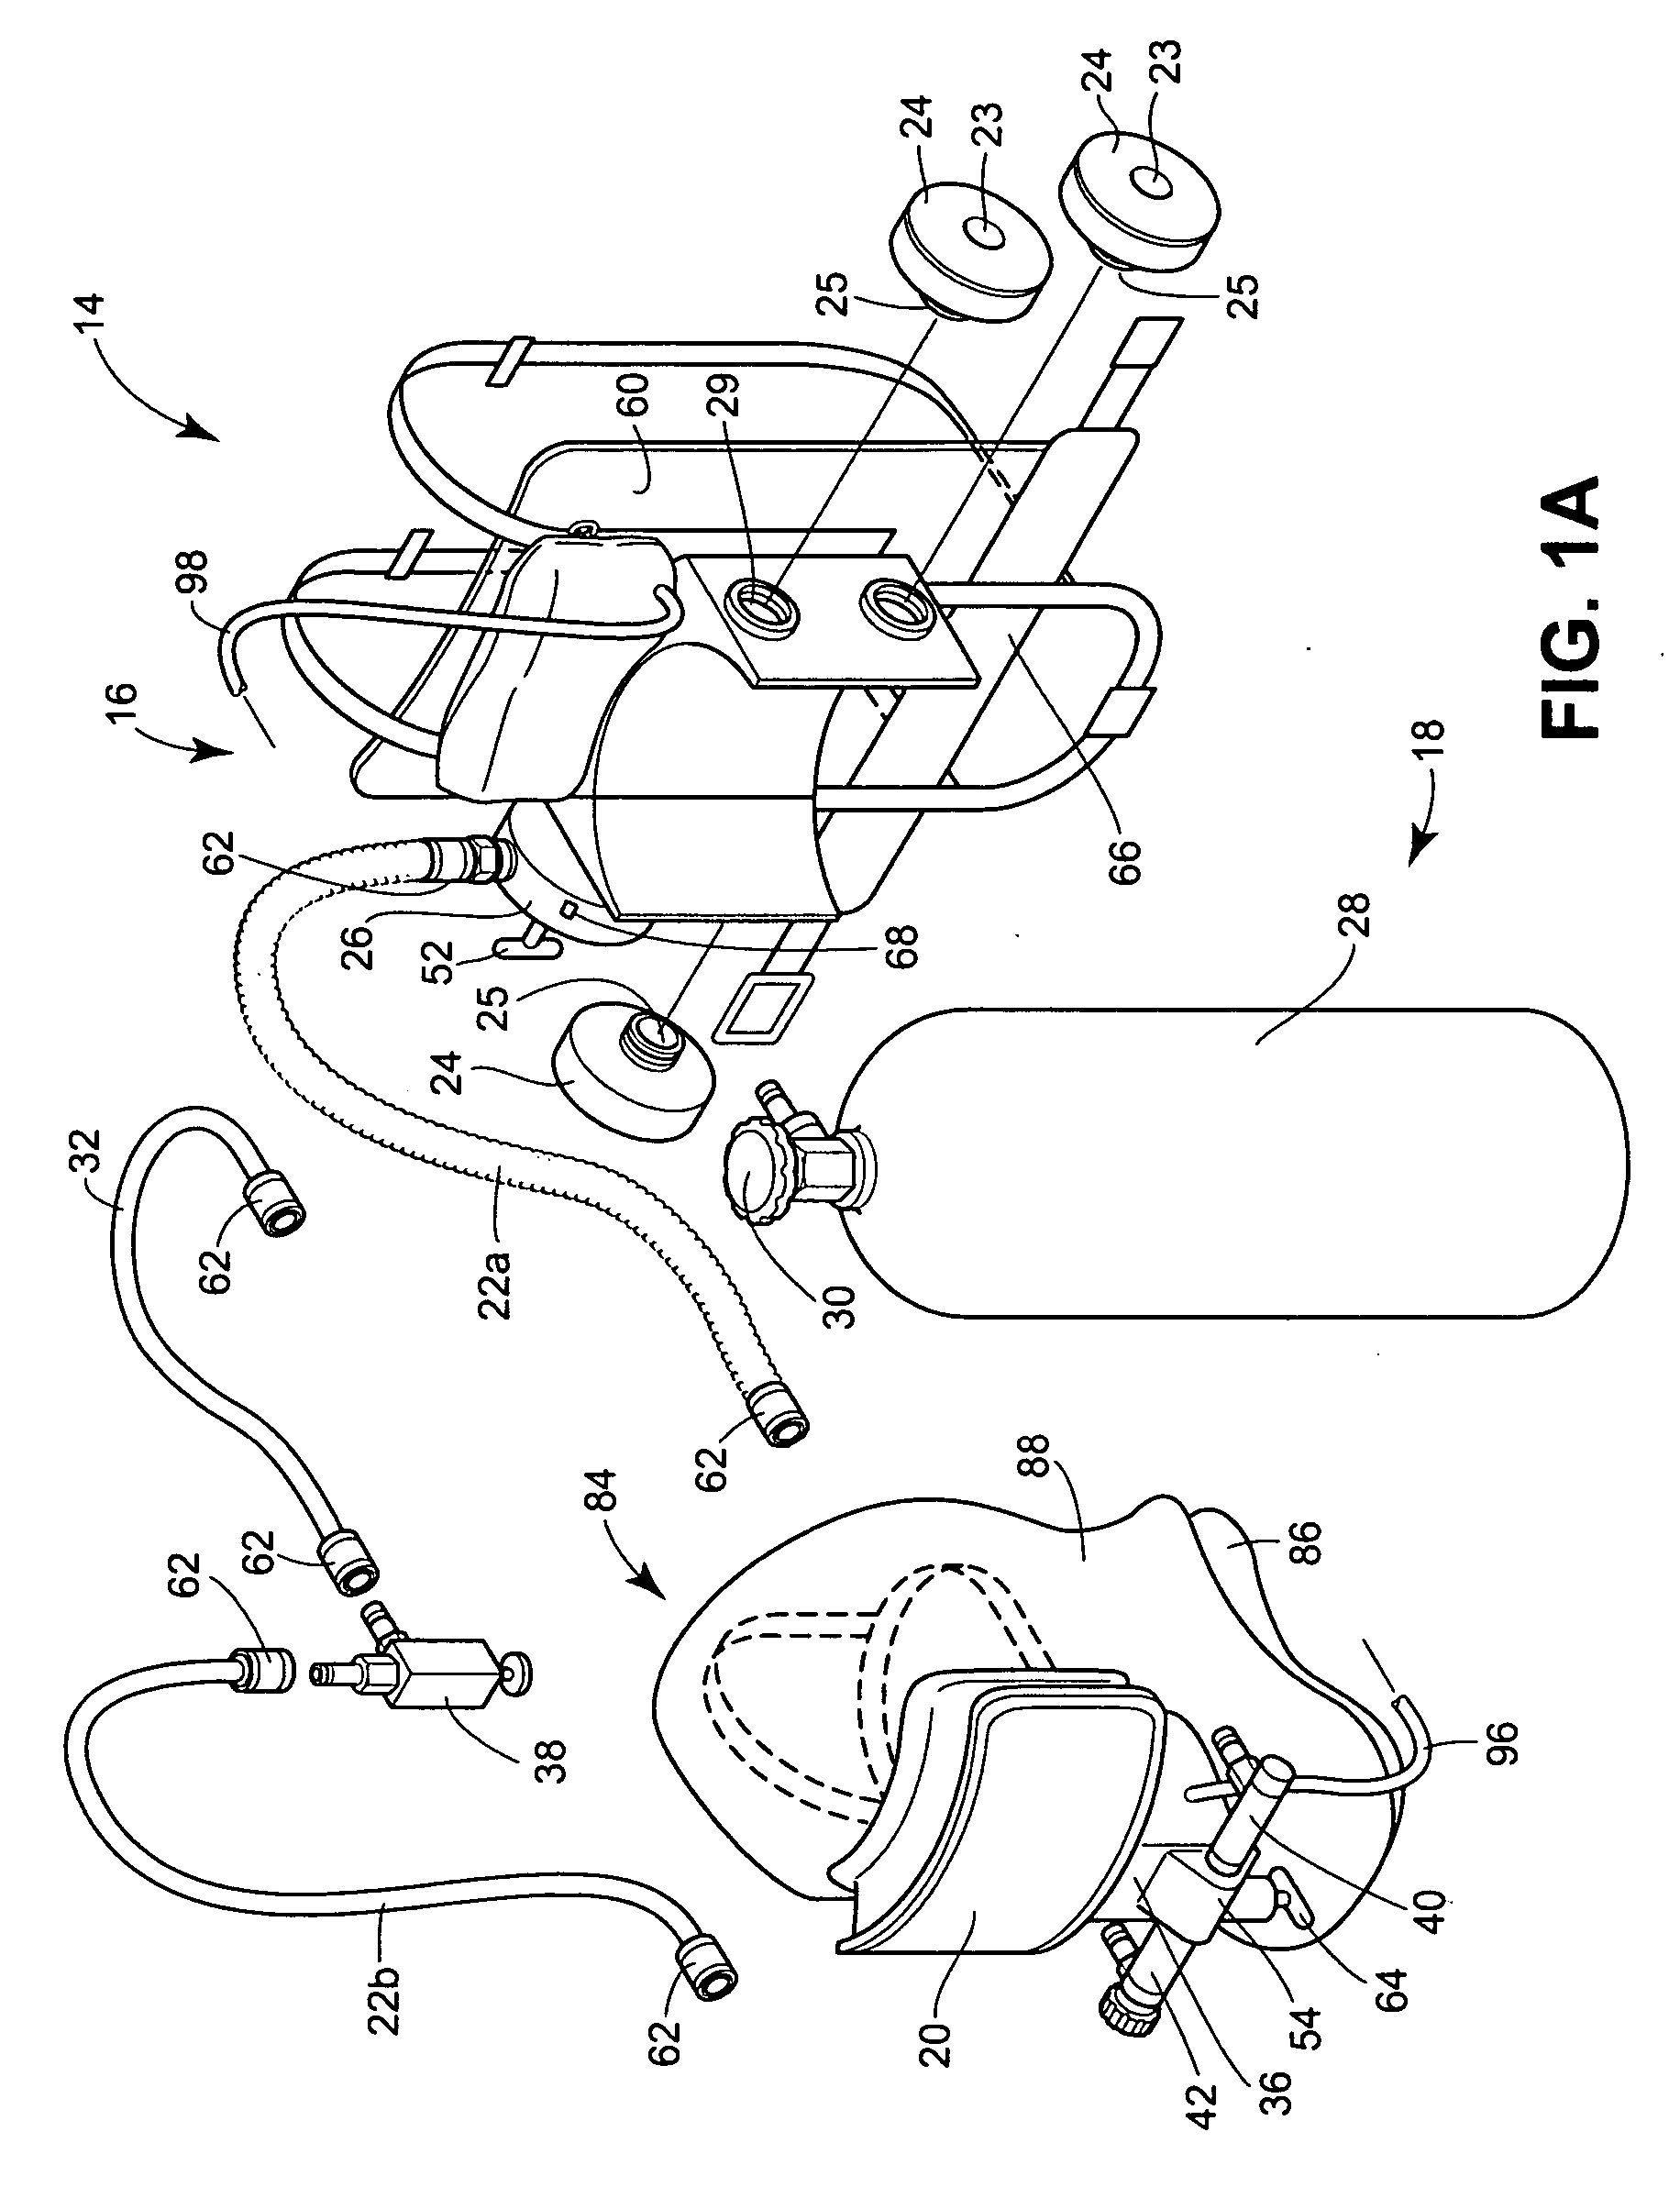 Apparatus and method for providing breathable air and bodily protection in a contaminated environment